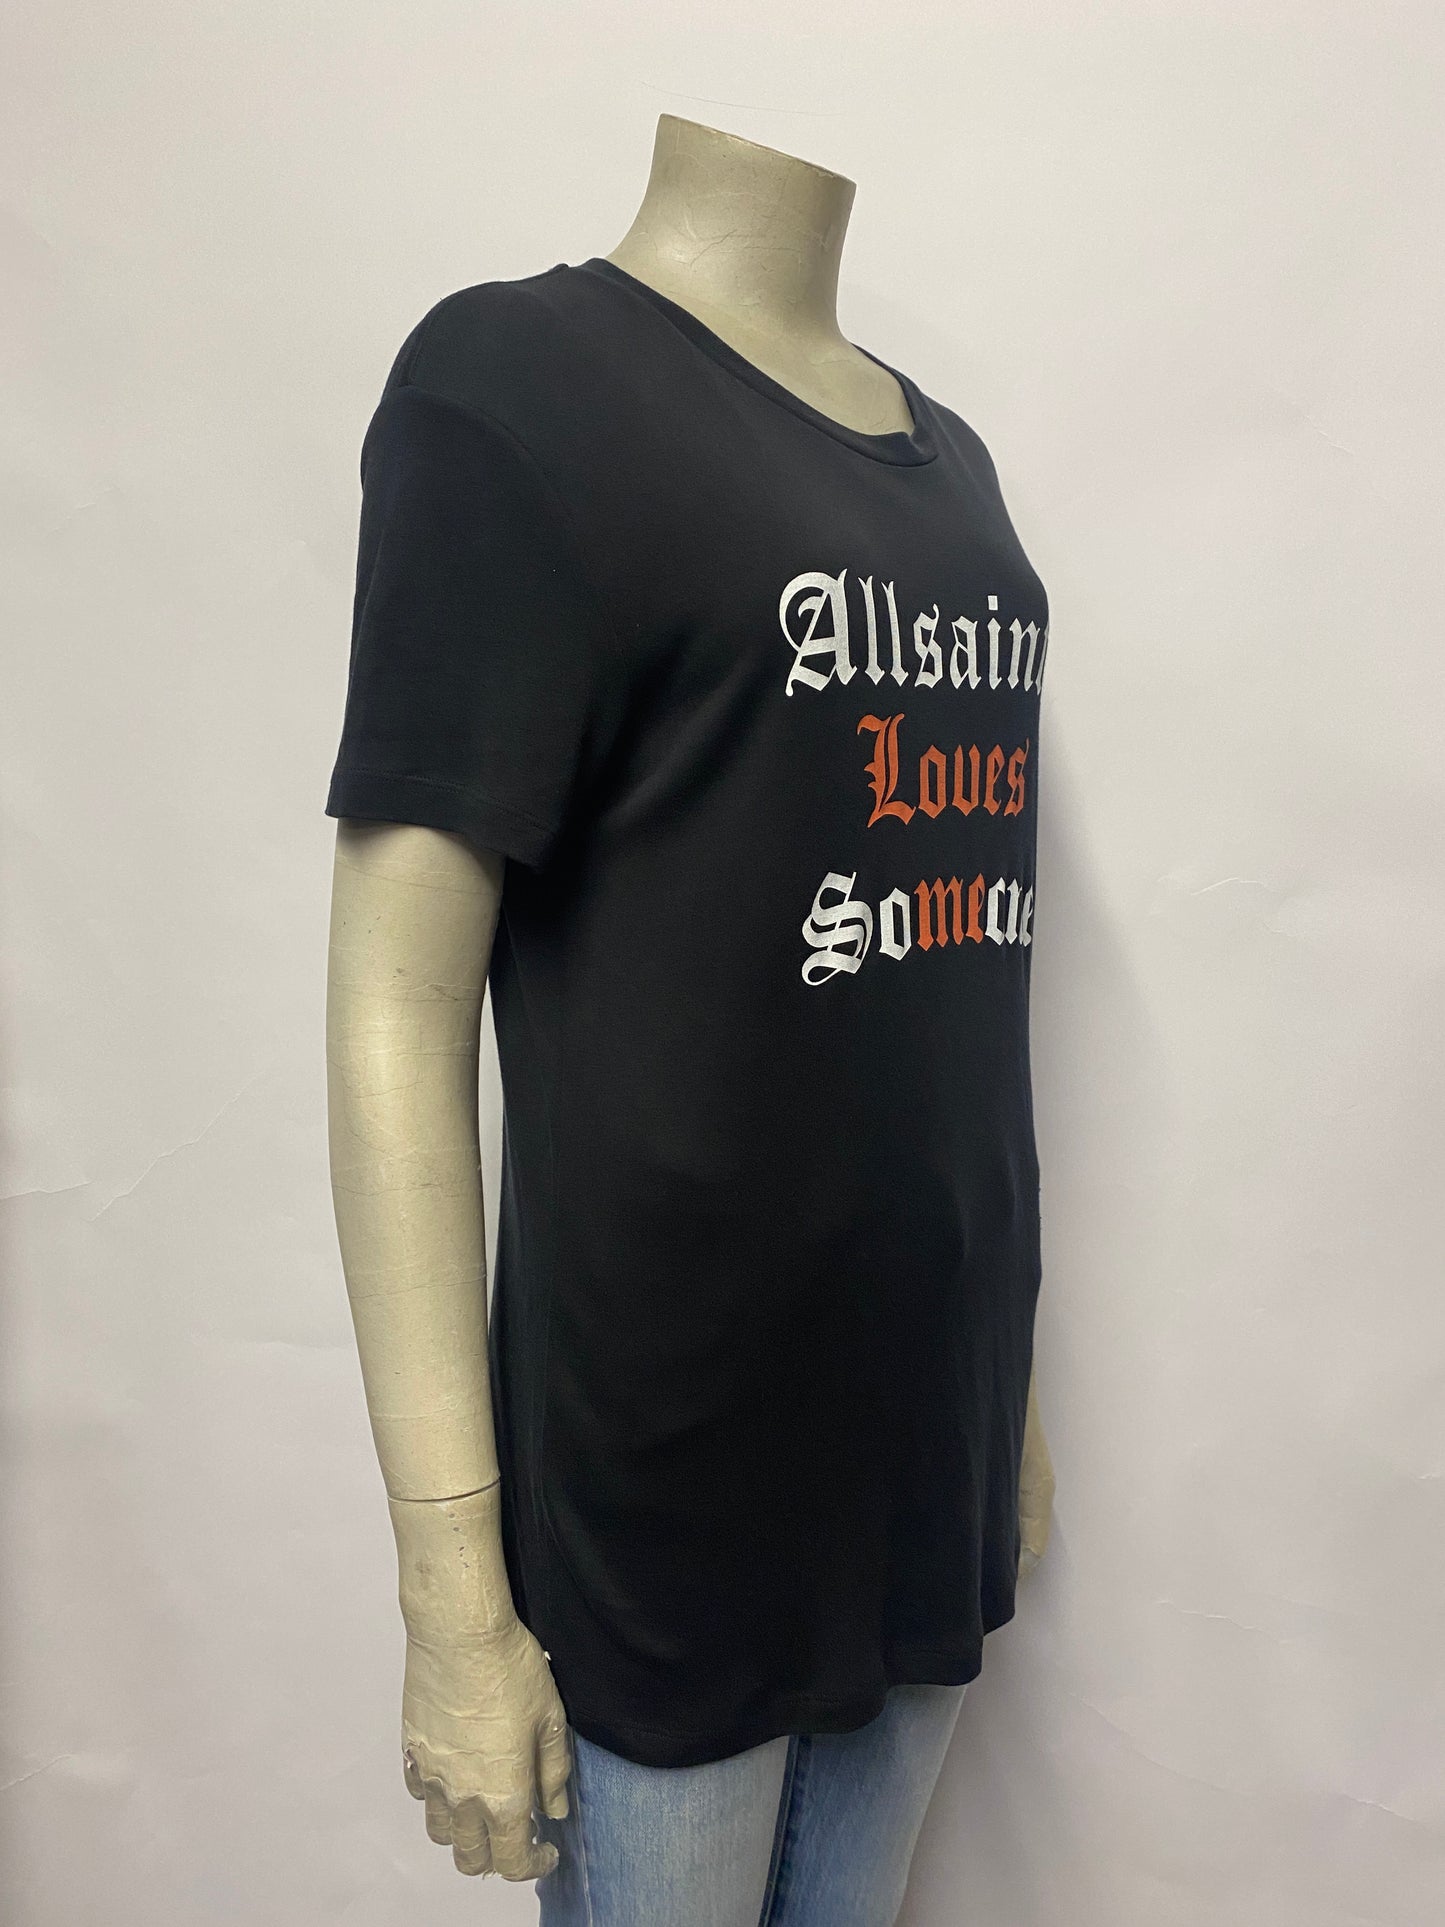 All Saints Loves Someone Black Cotton Text T-Shirt Small